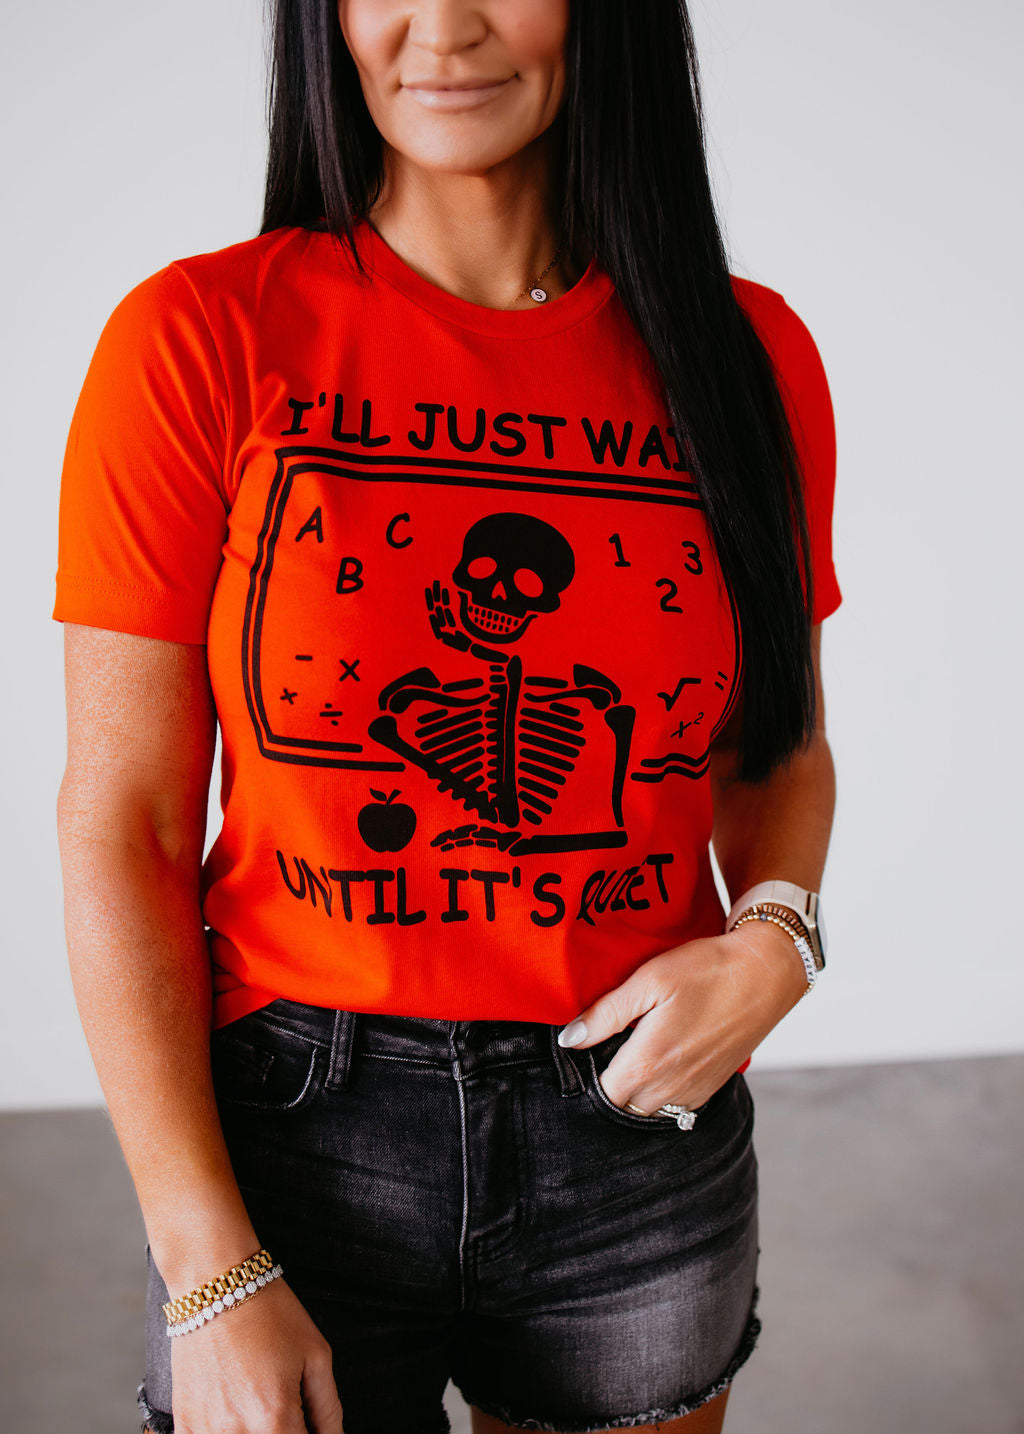 I'll Just Wait Graphic Tee